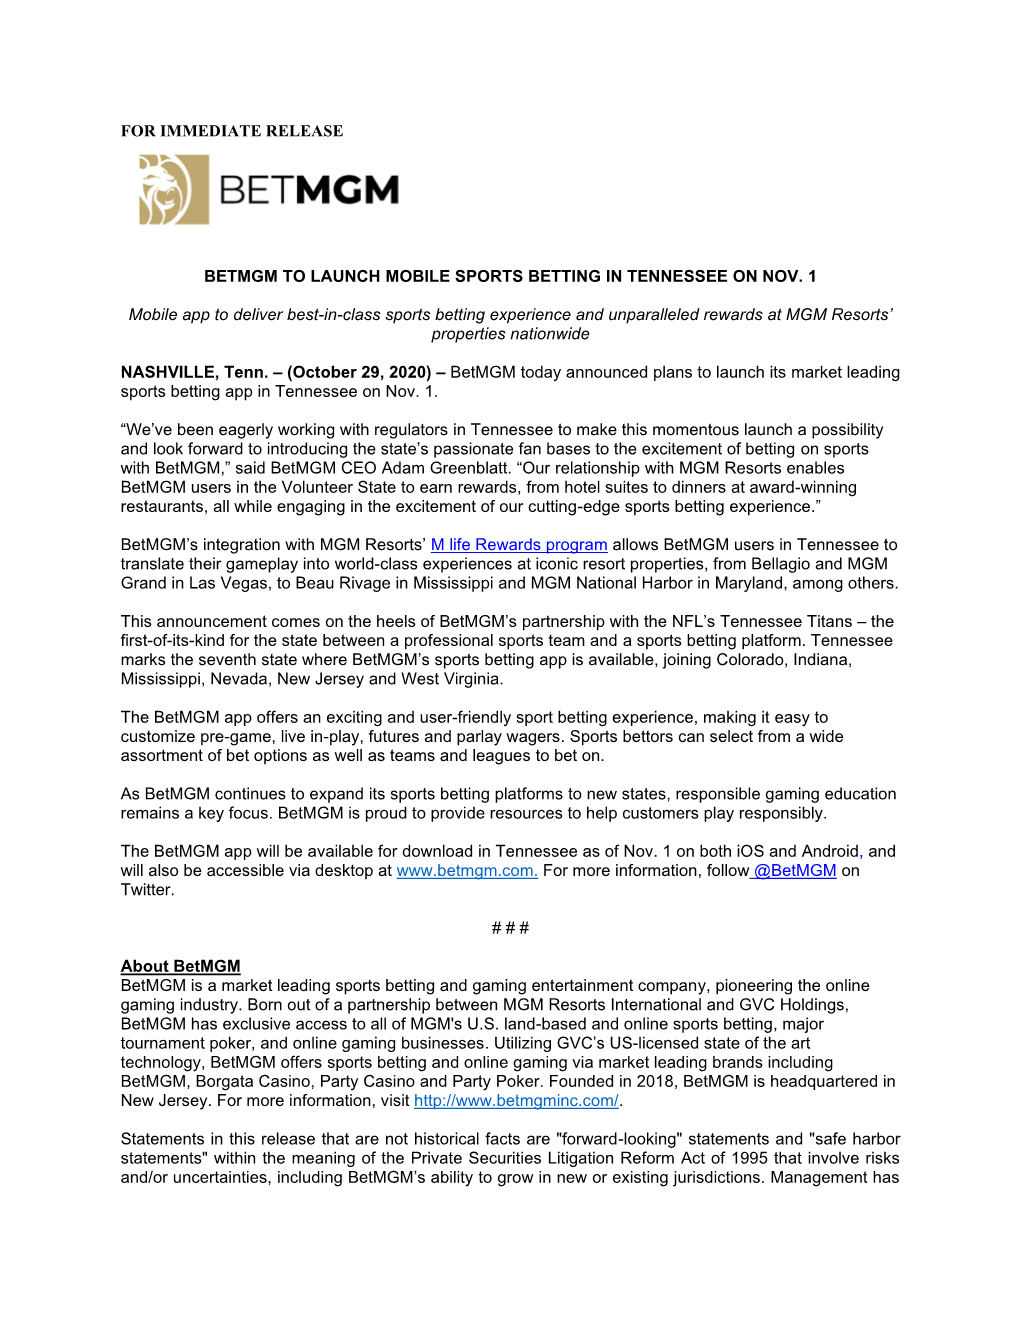 For Immediate Release Betmgm to Launch Mobile Sports